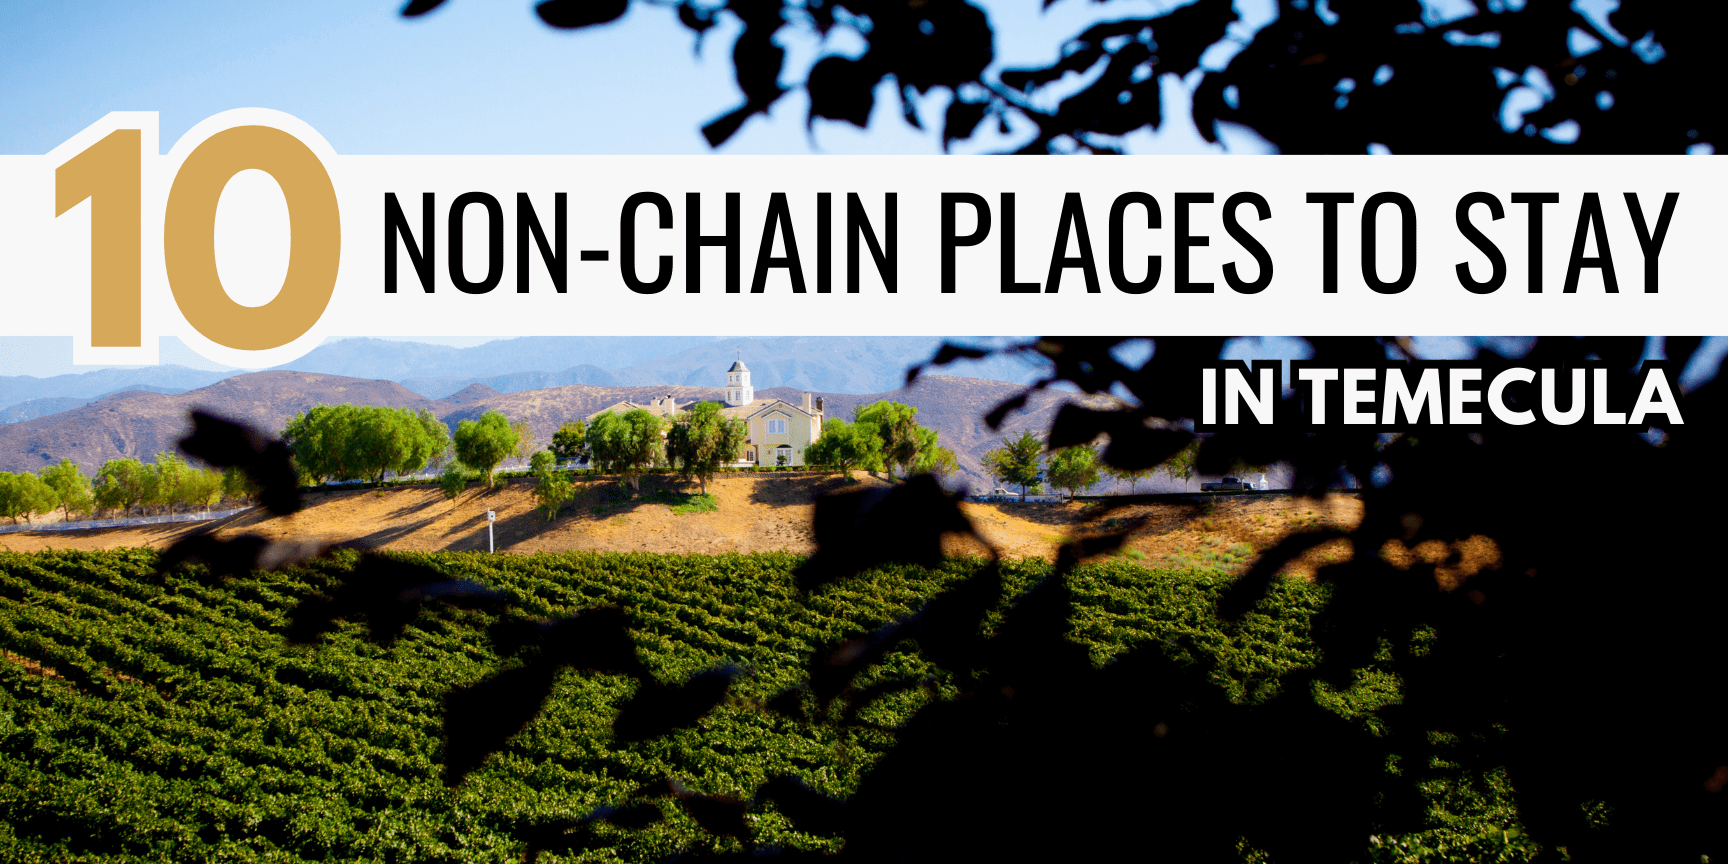 10 Non-Chain Places to Stay in Temecula